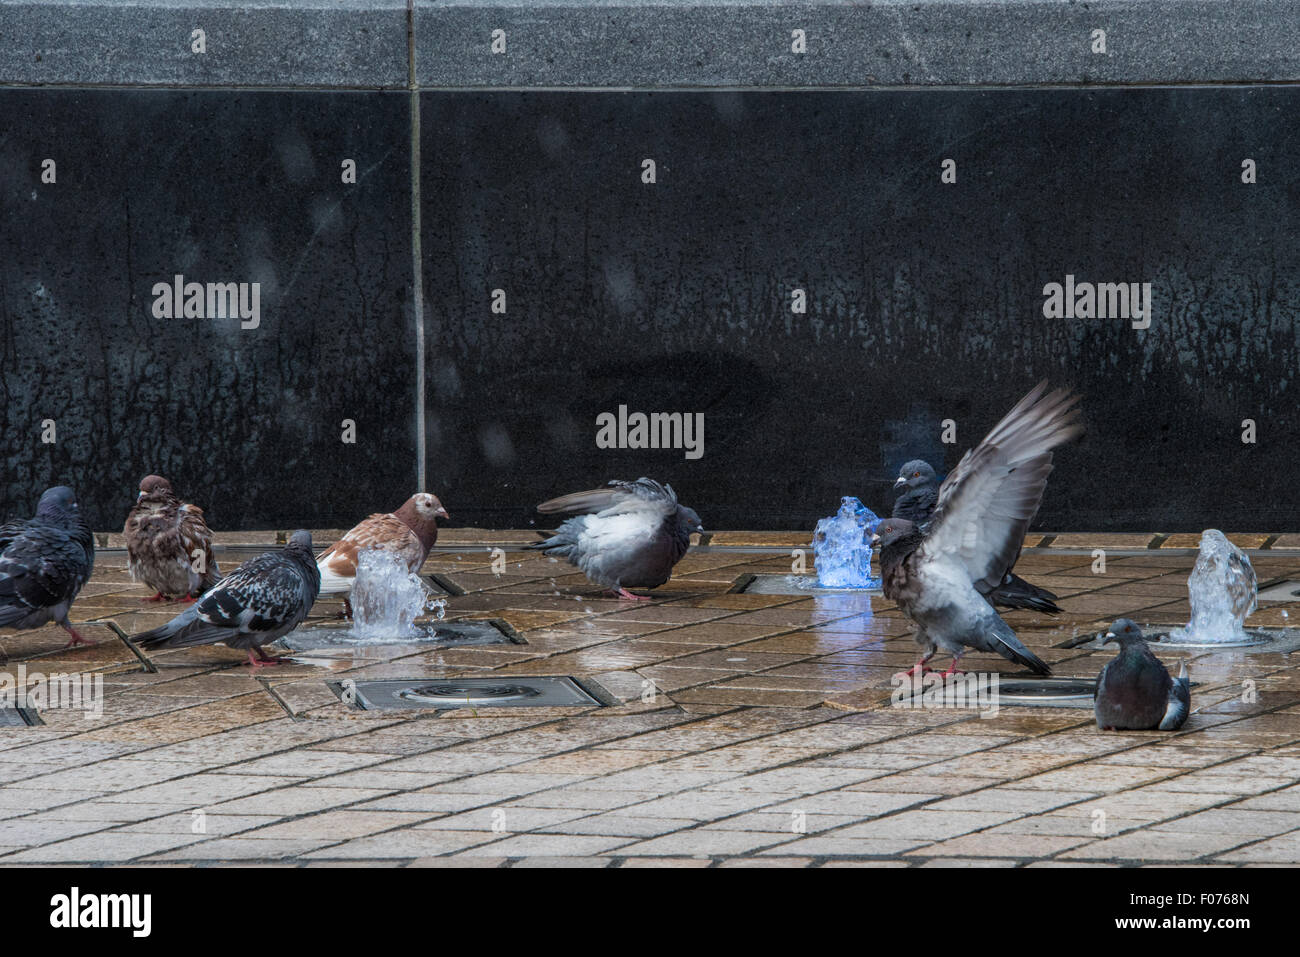 Pigeons taking a bath in fountain queens Square Wolverhampton uk Stock Photo